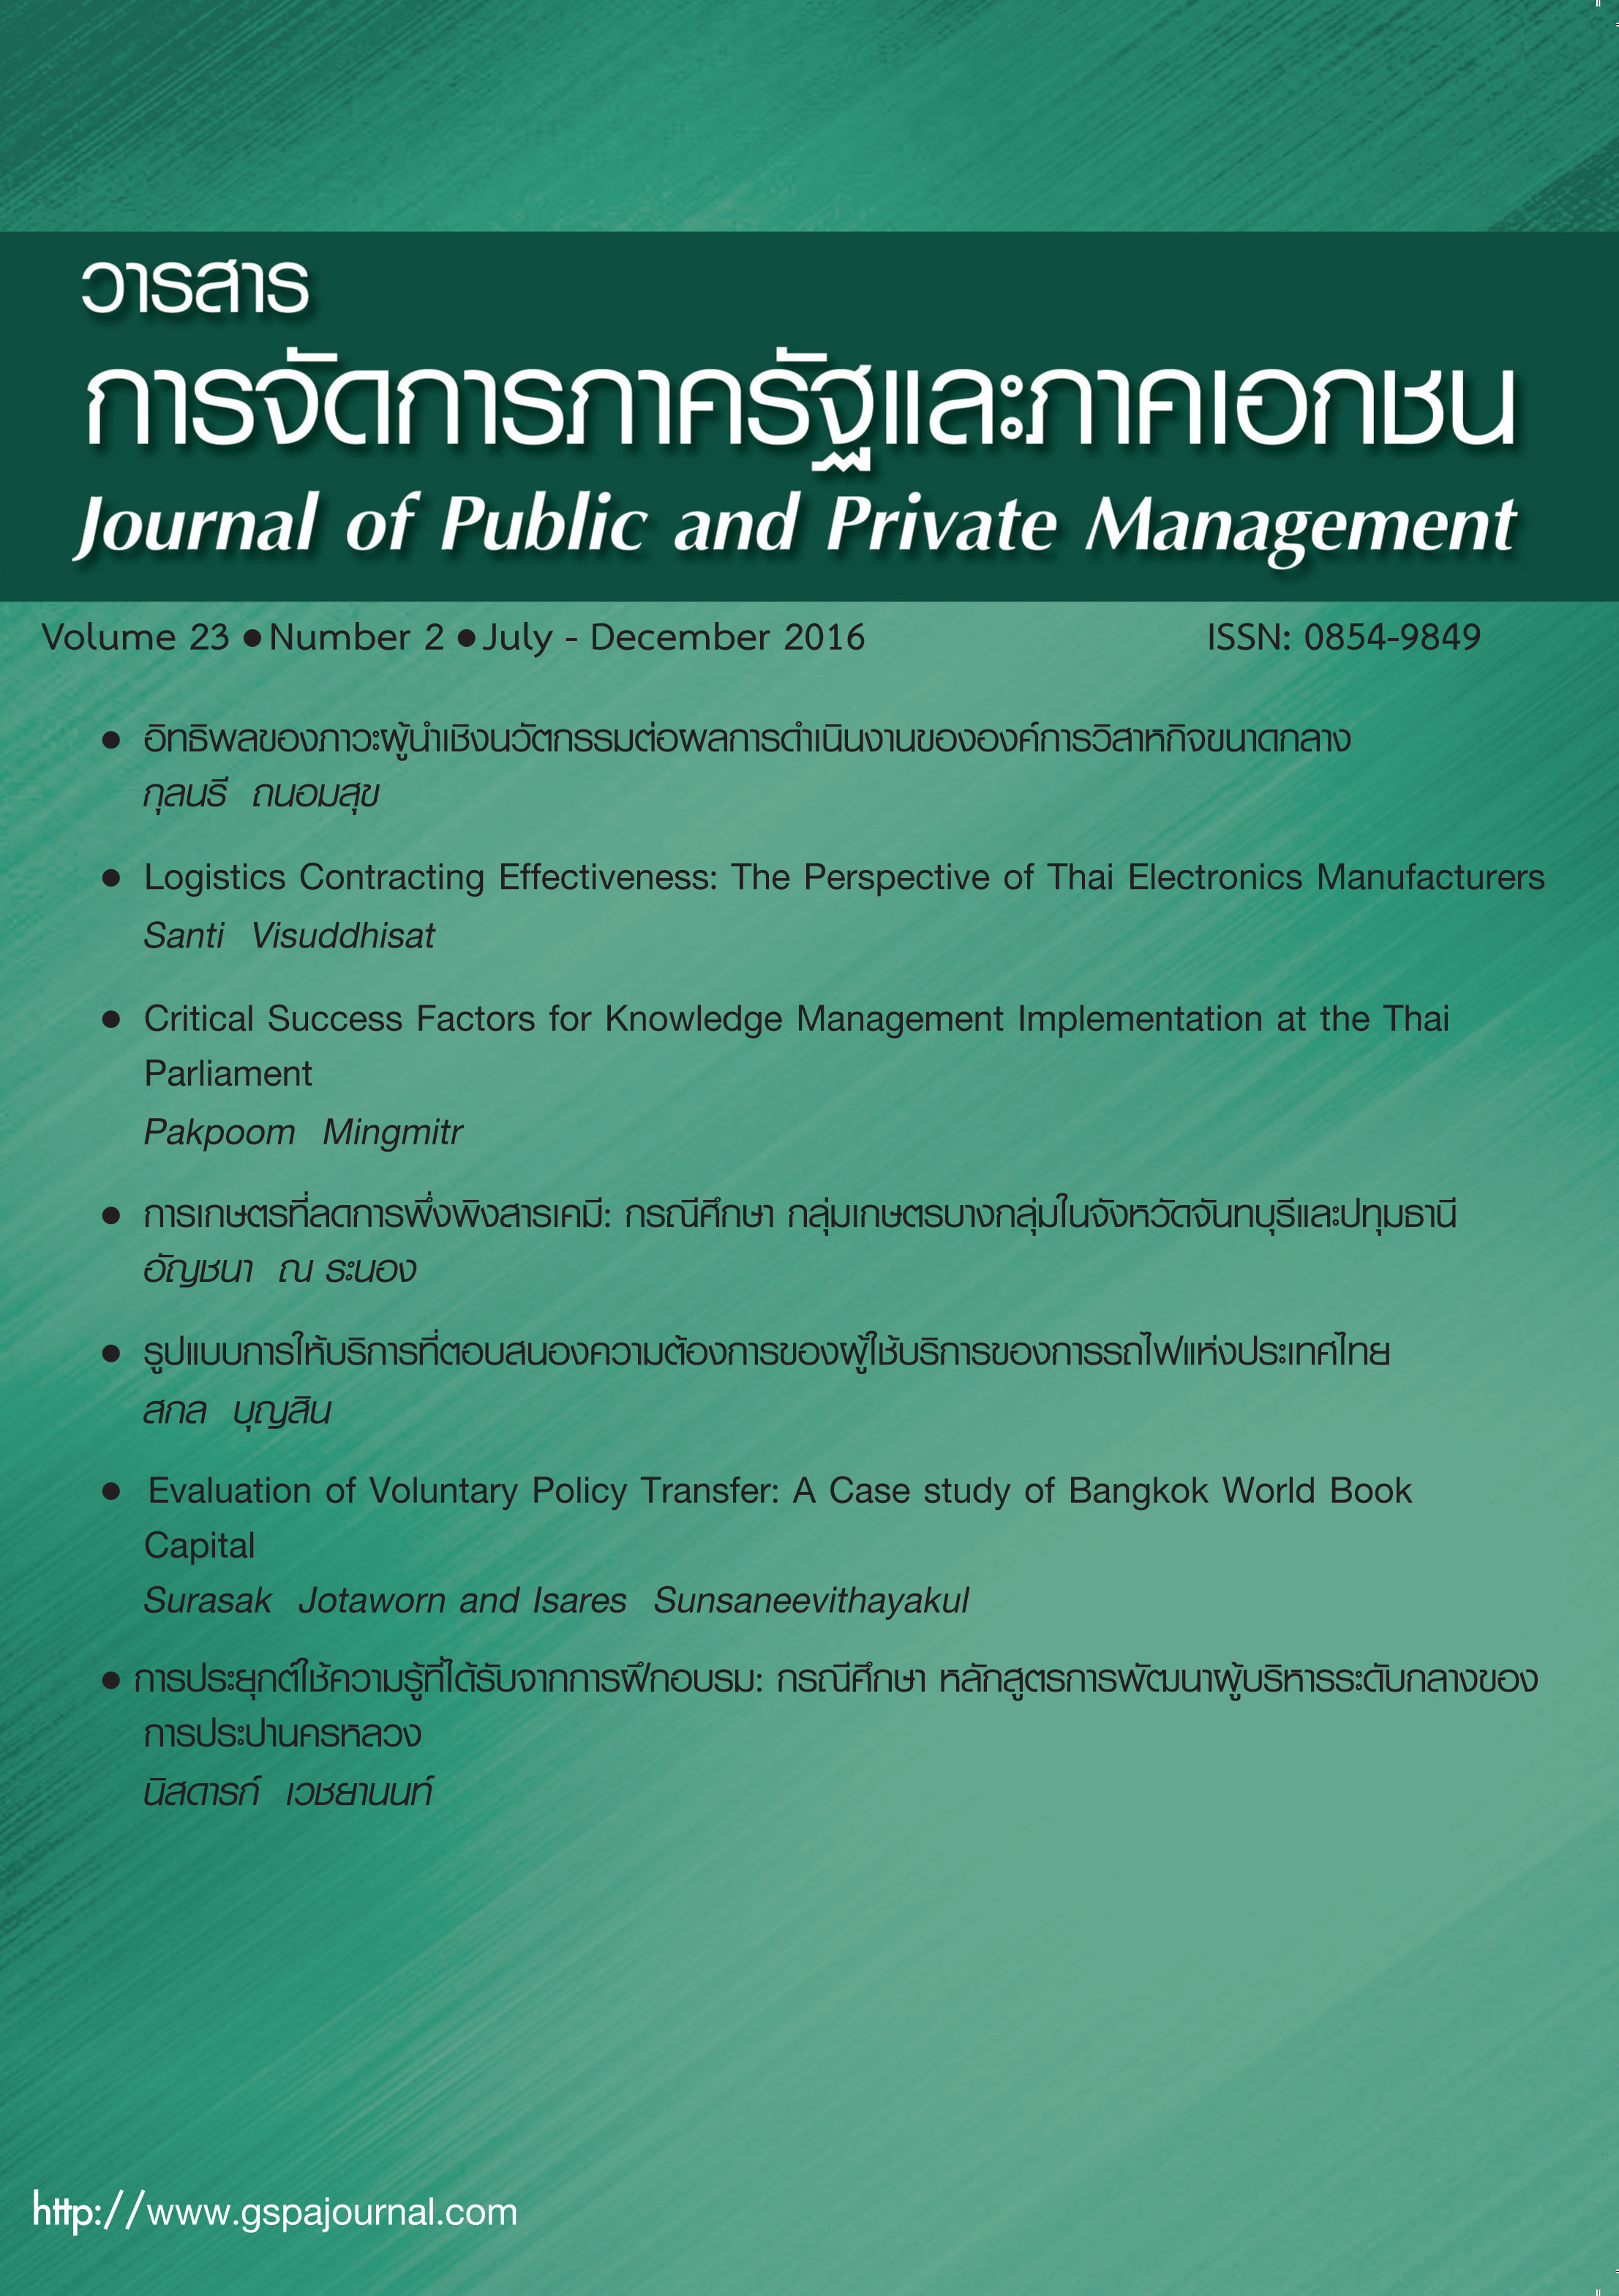 					View Vol. 23 No. 2 (2016): Journal of Public and Private Management Volume 23 Number 2
				